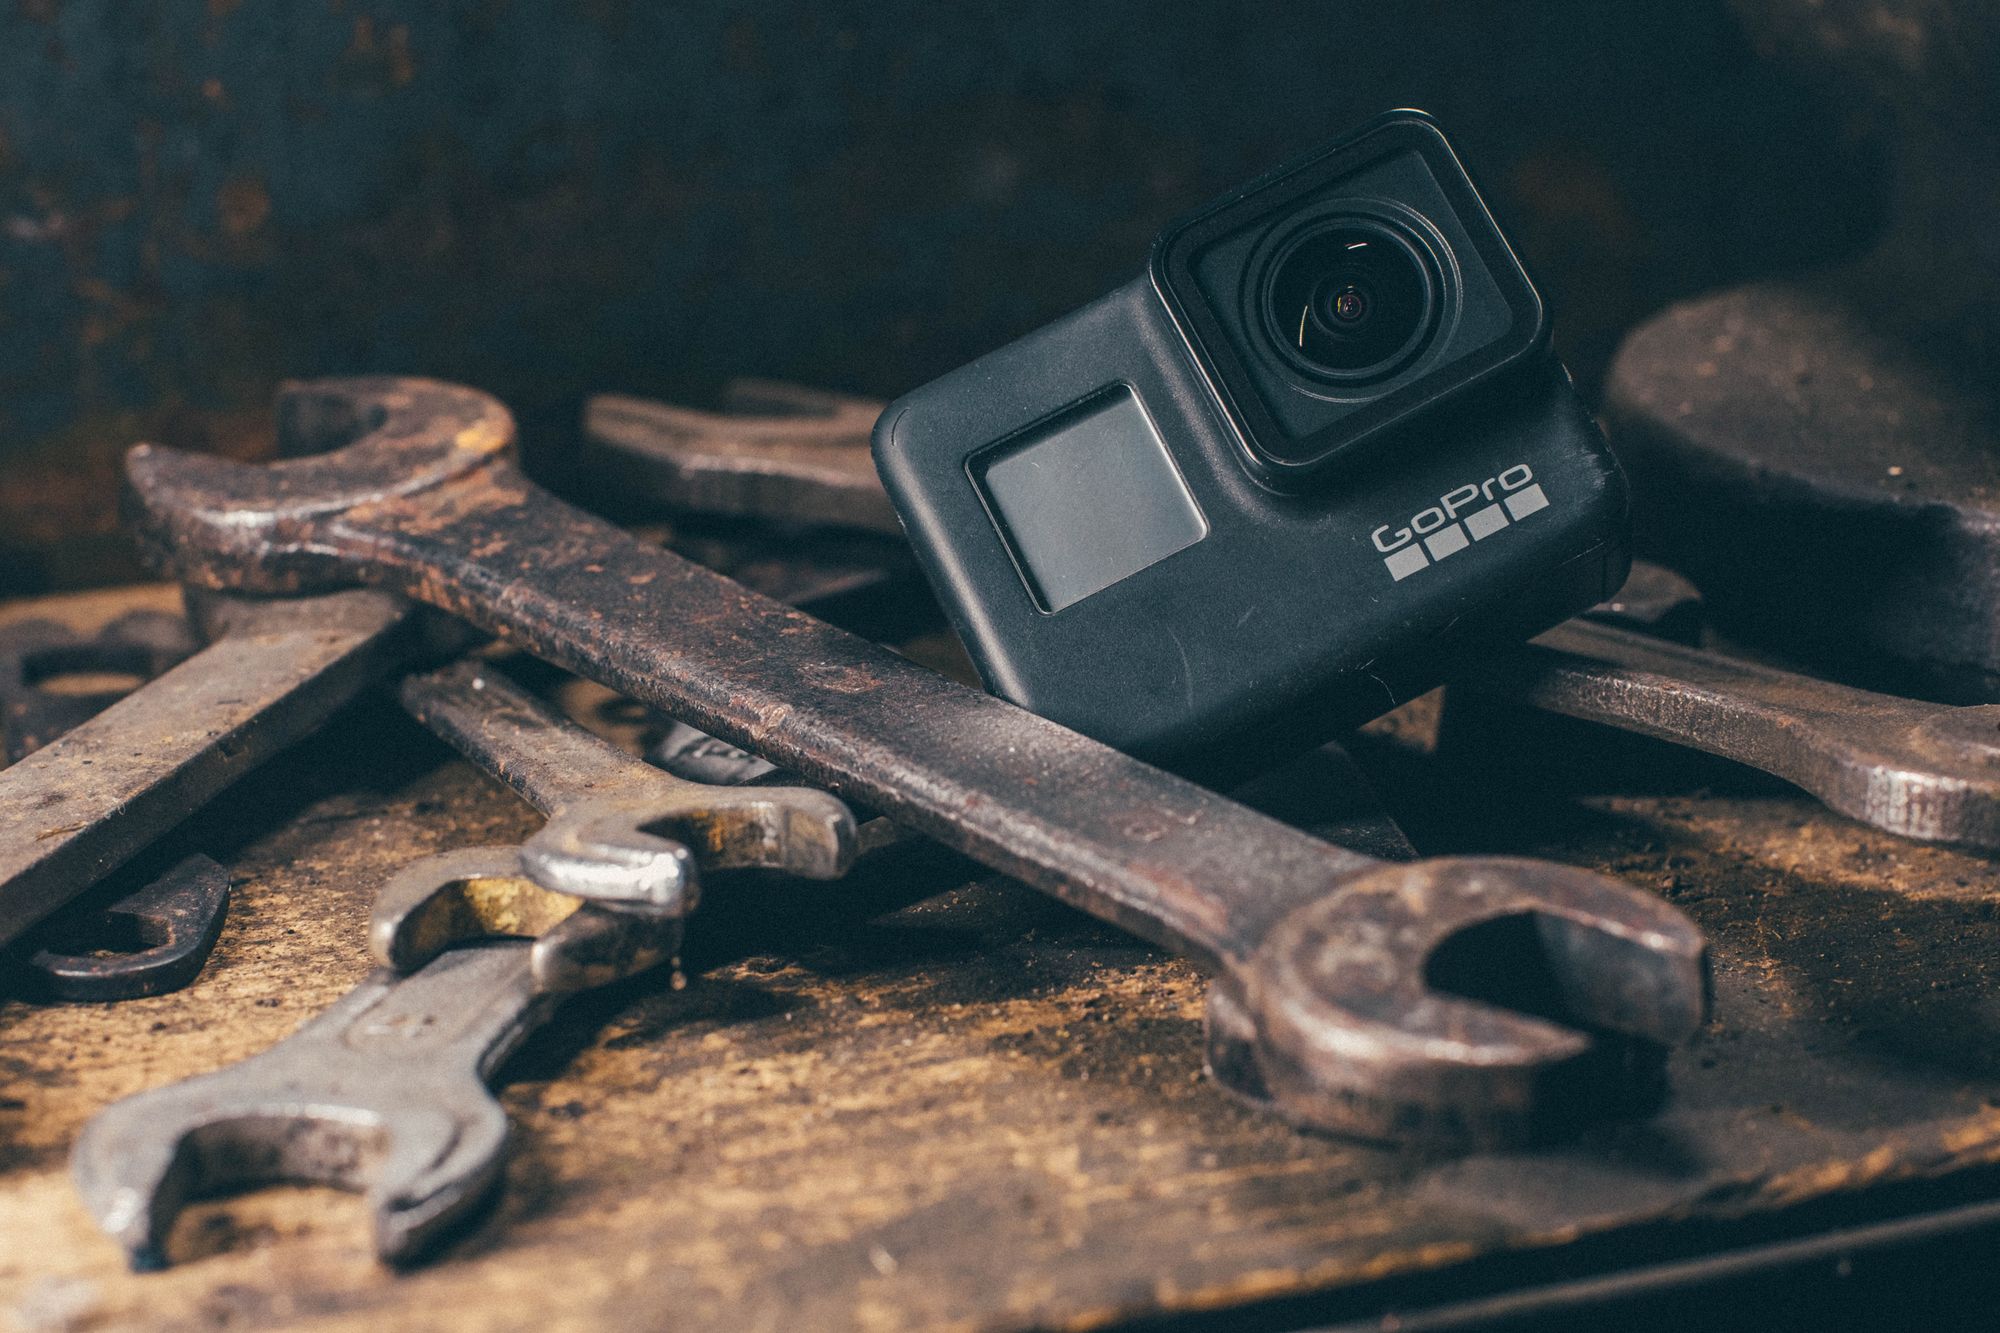 The best action camera is sturdy